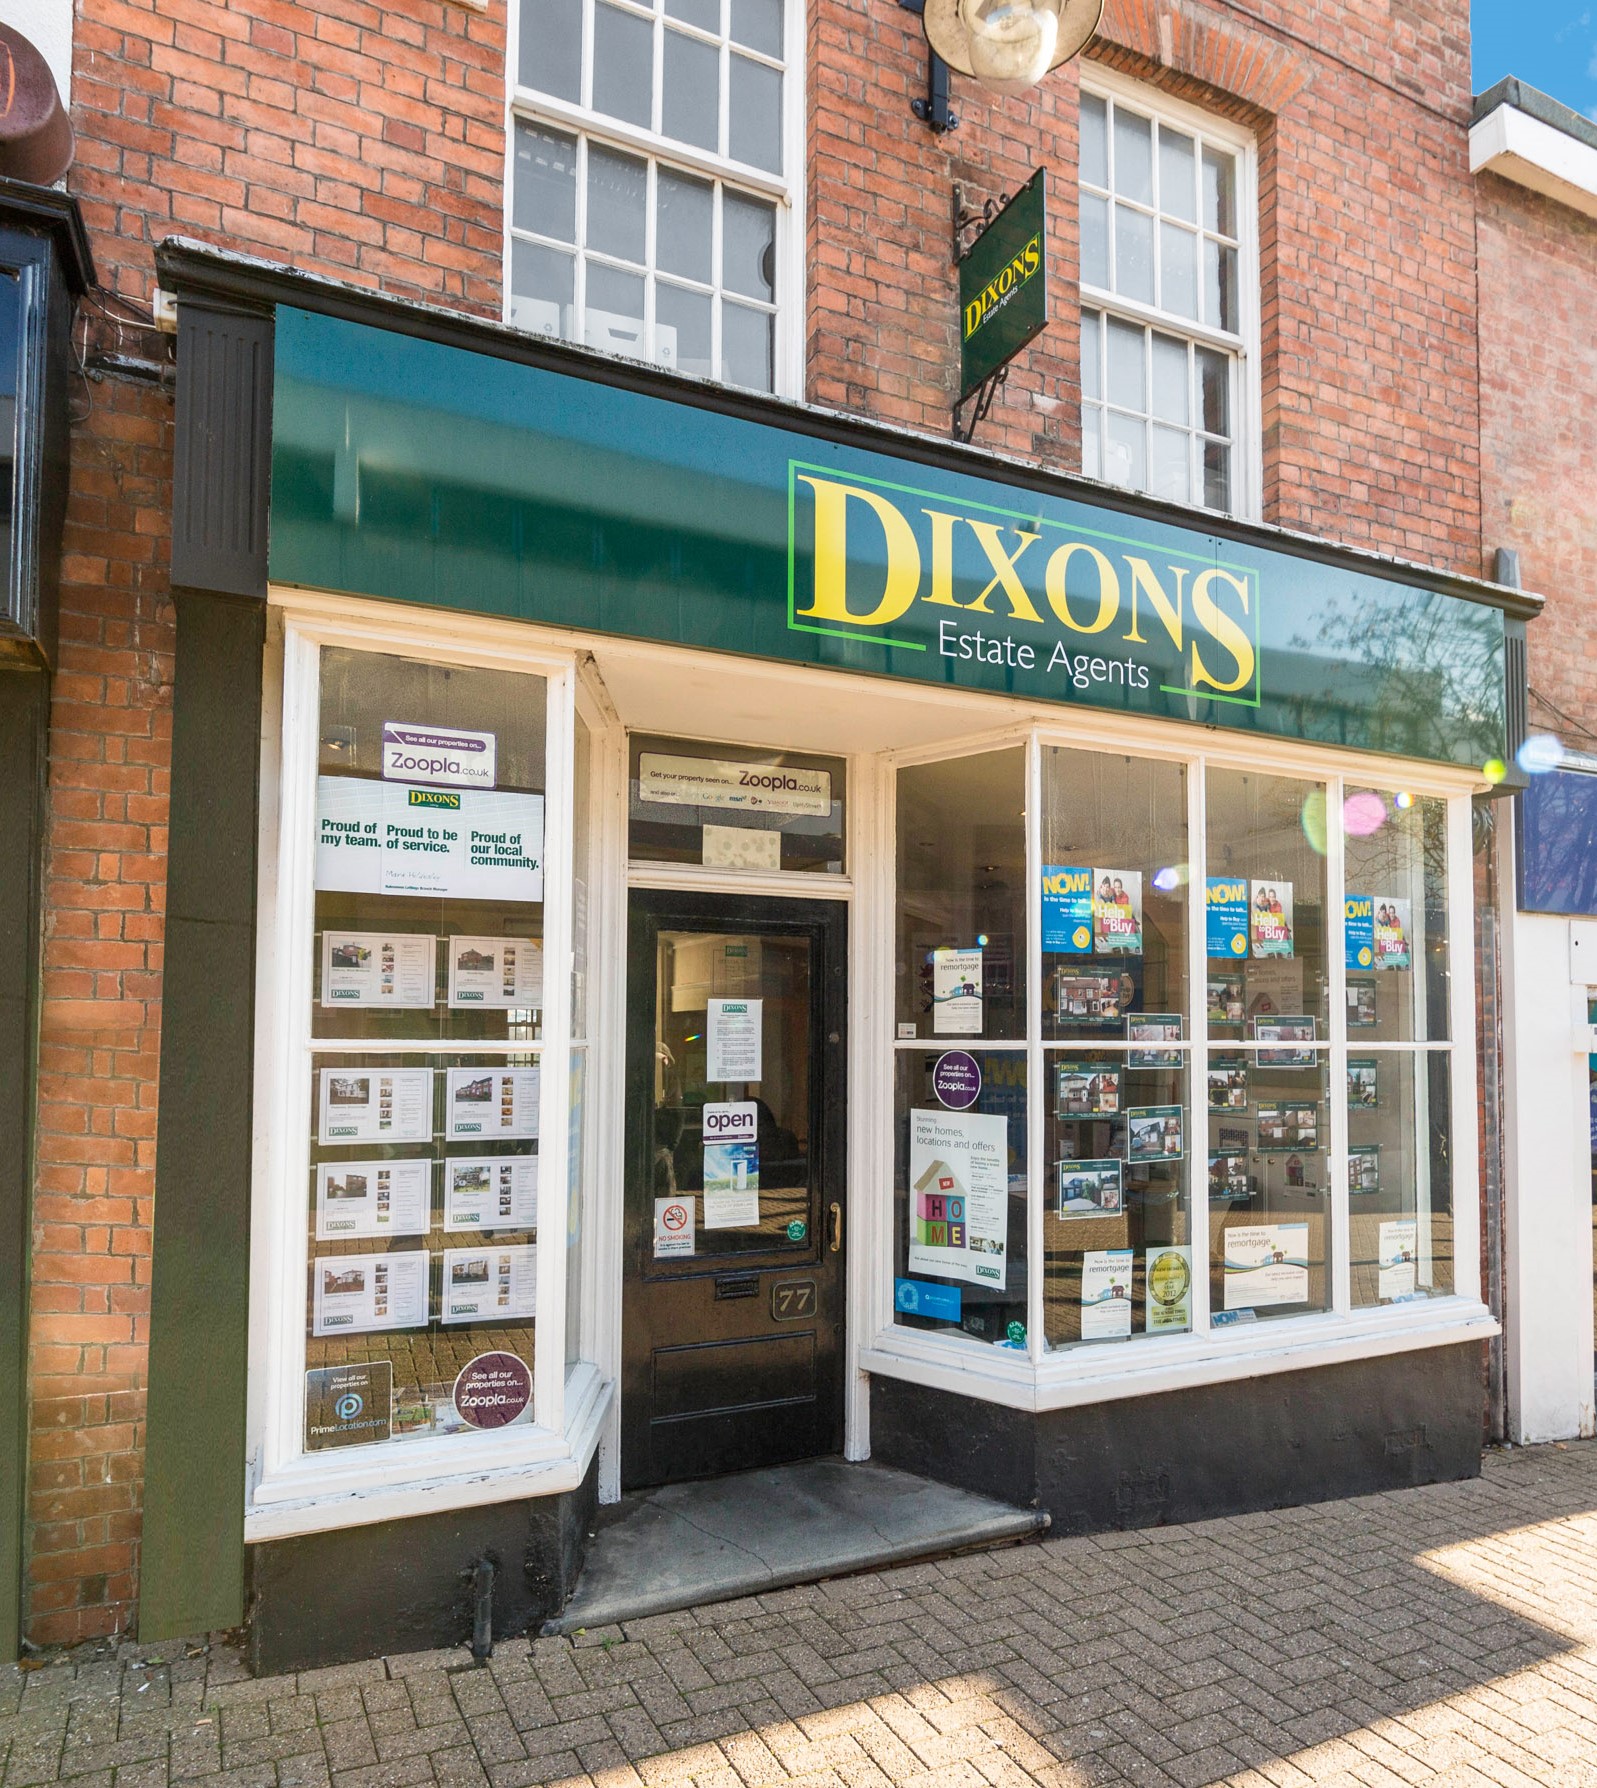 Images Dixons Sales and Letting Agents Halesowen